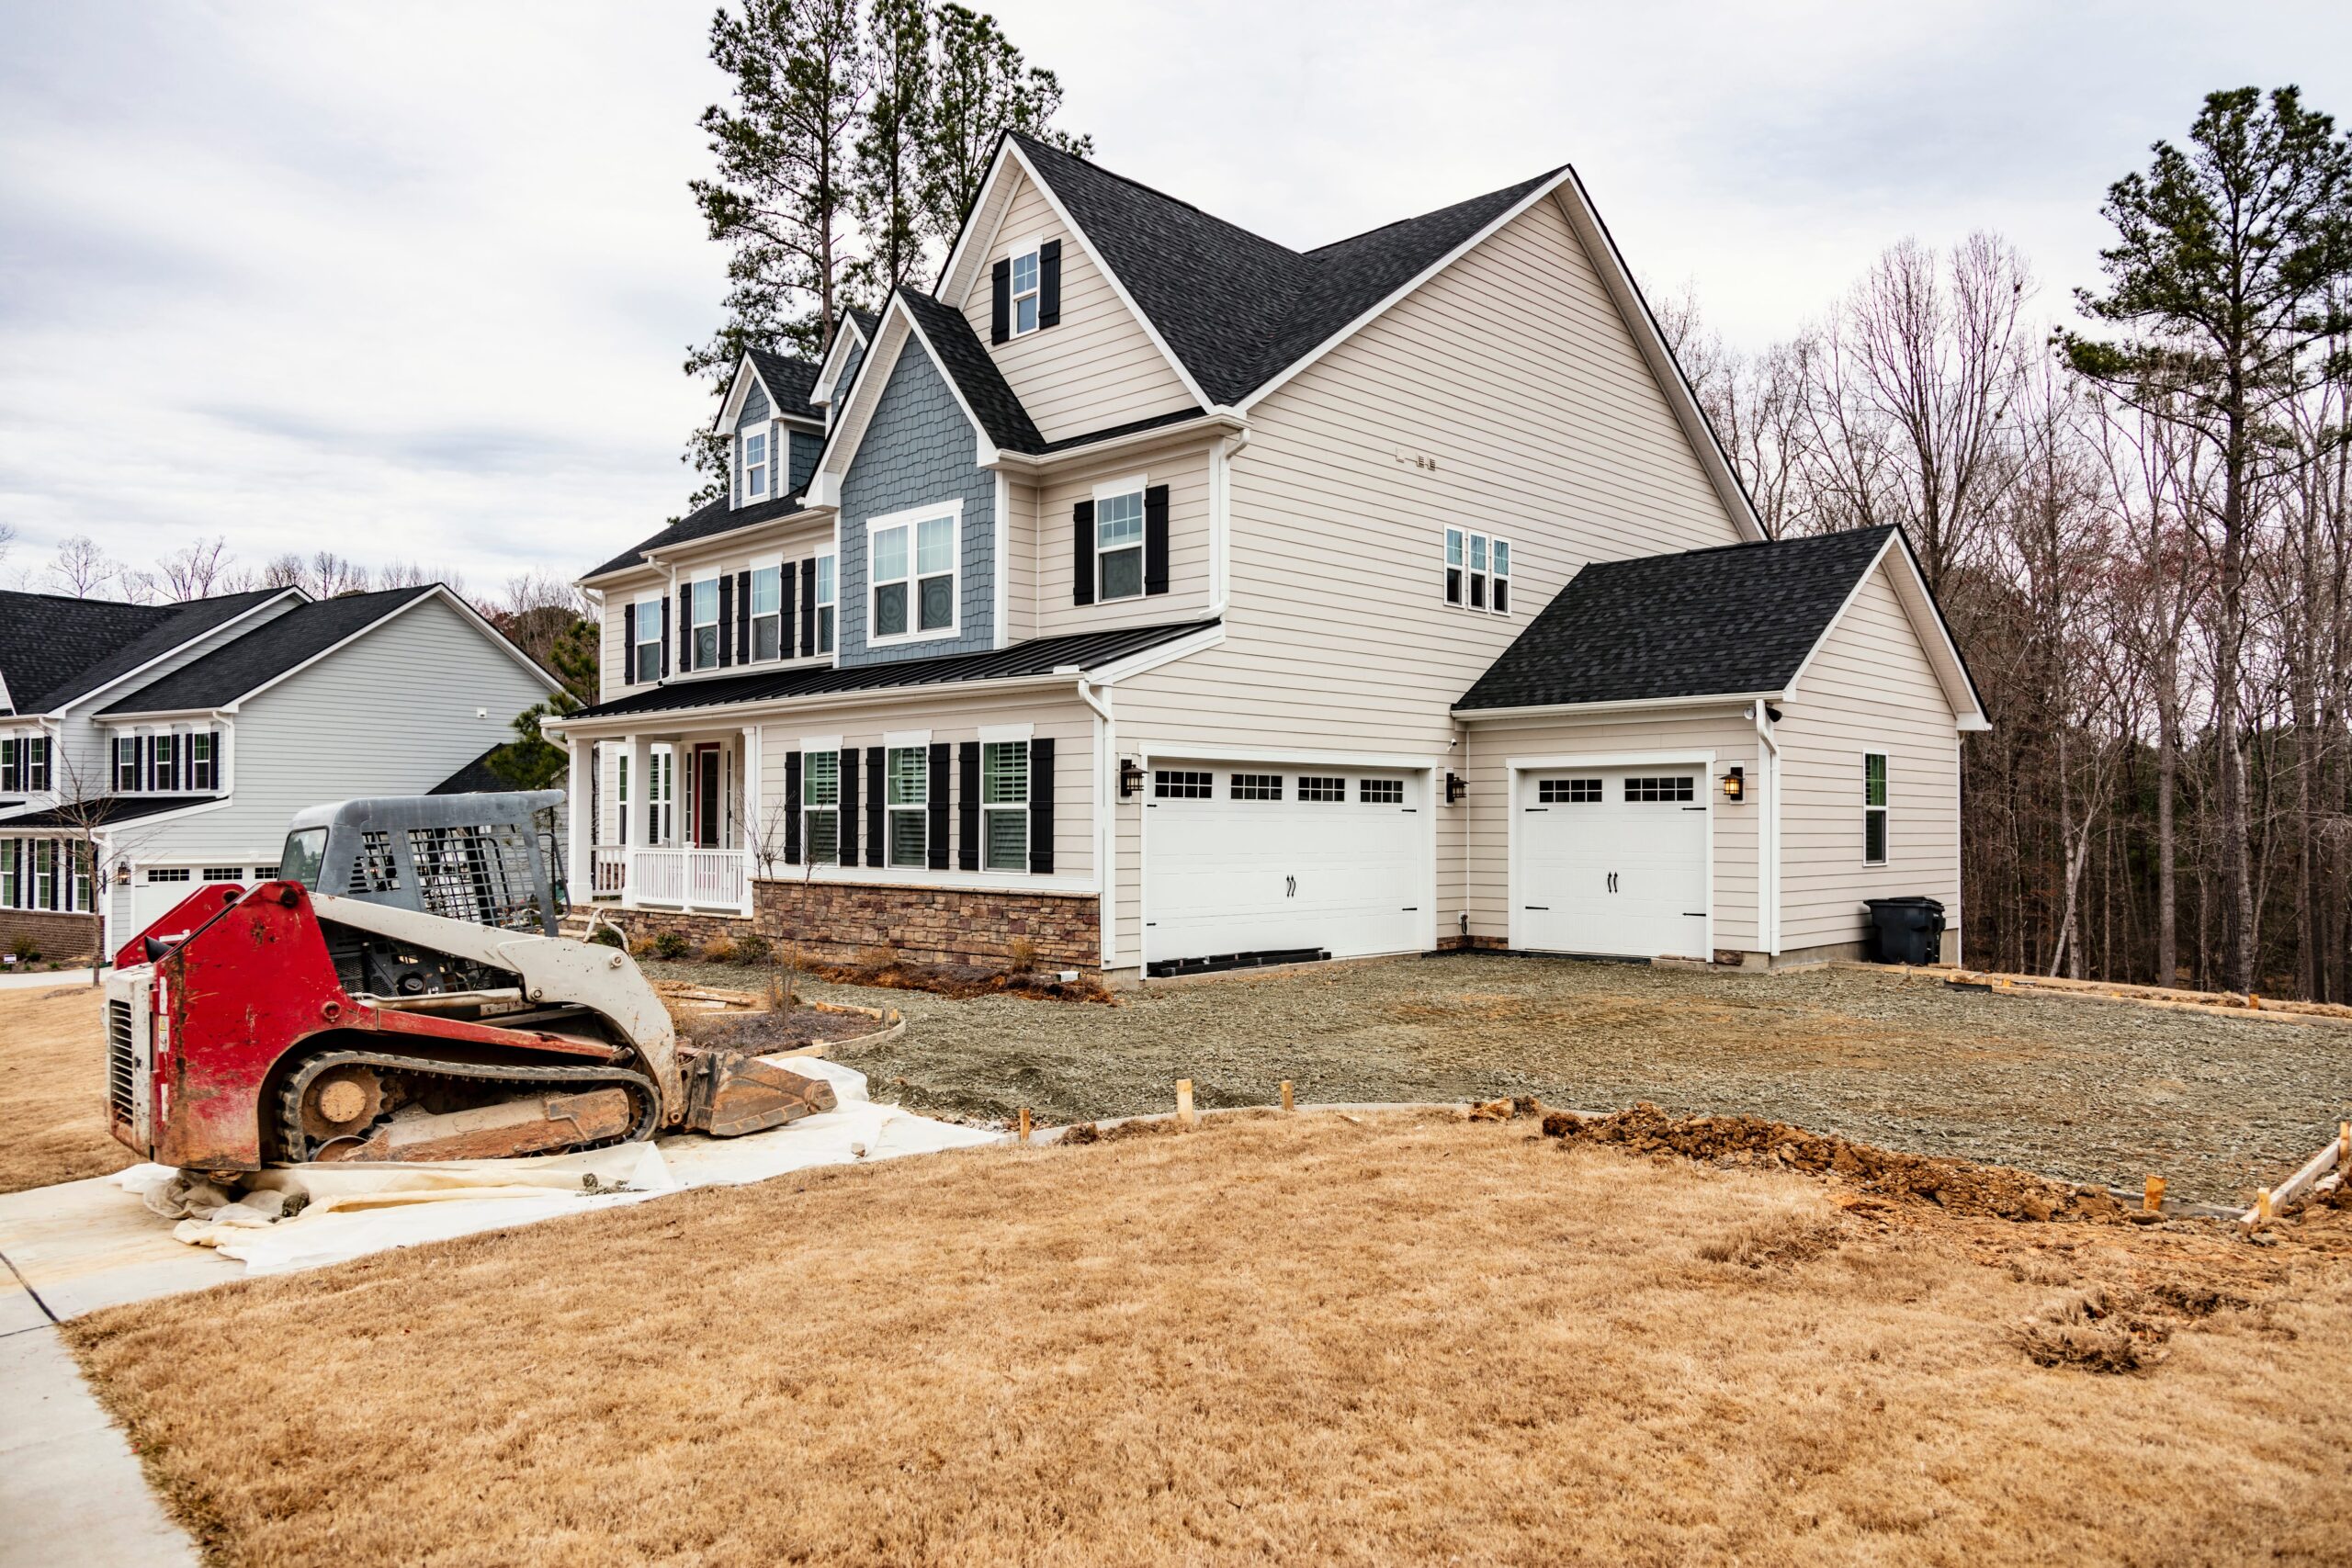 Read more about the article “Is It Time for a New Driveway? Checklist and Expert Advice”